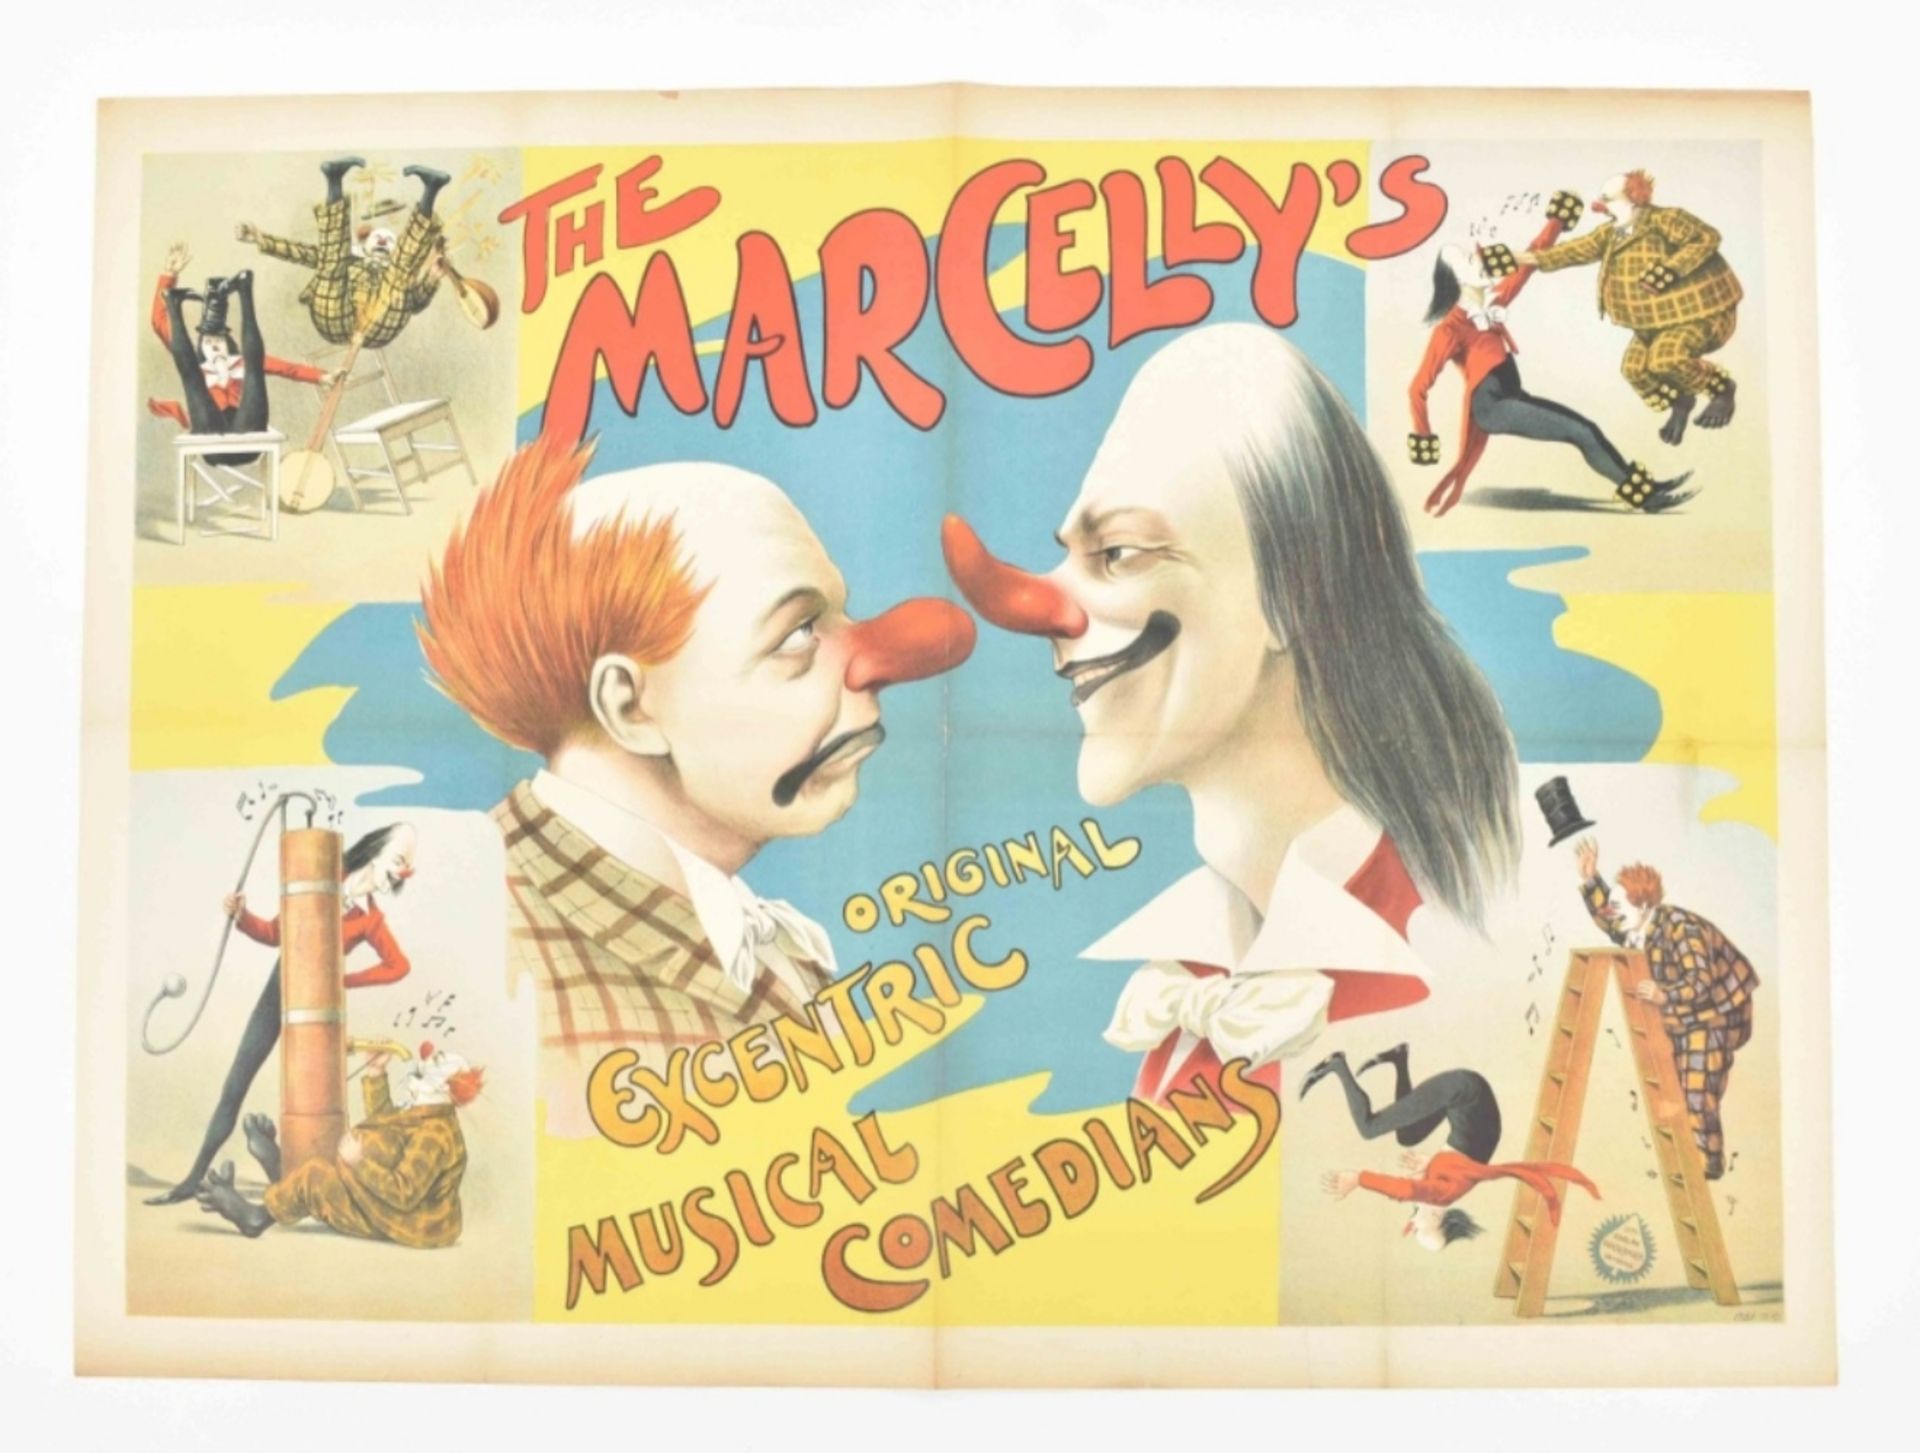 [Clowns] [Comedy] The Marcelly's, original excentric musical comedians Friedländer, Hamburg, 1900